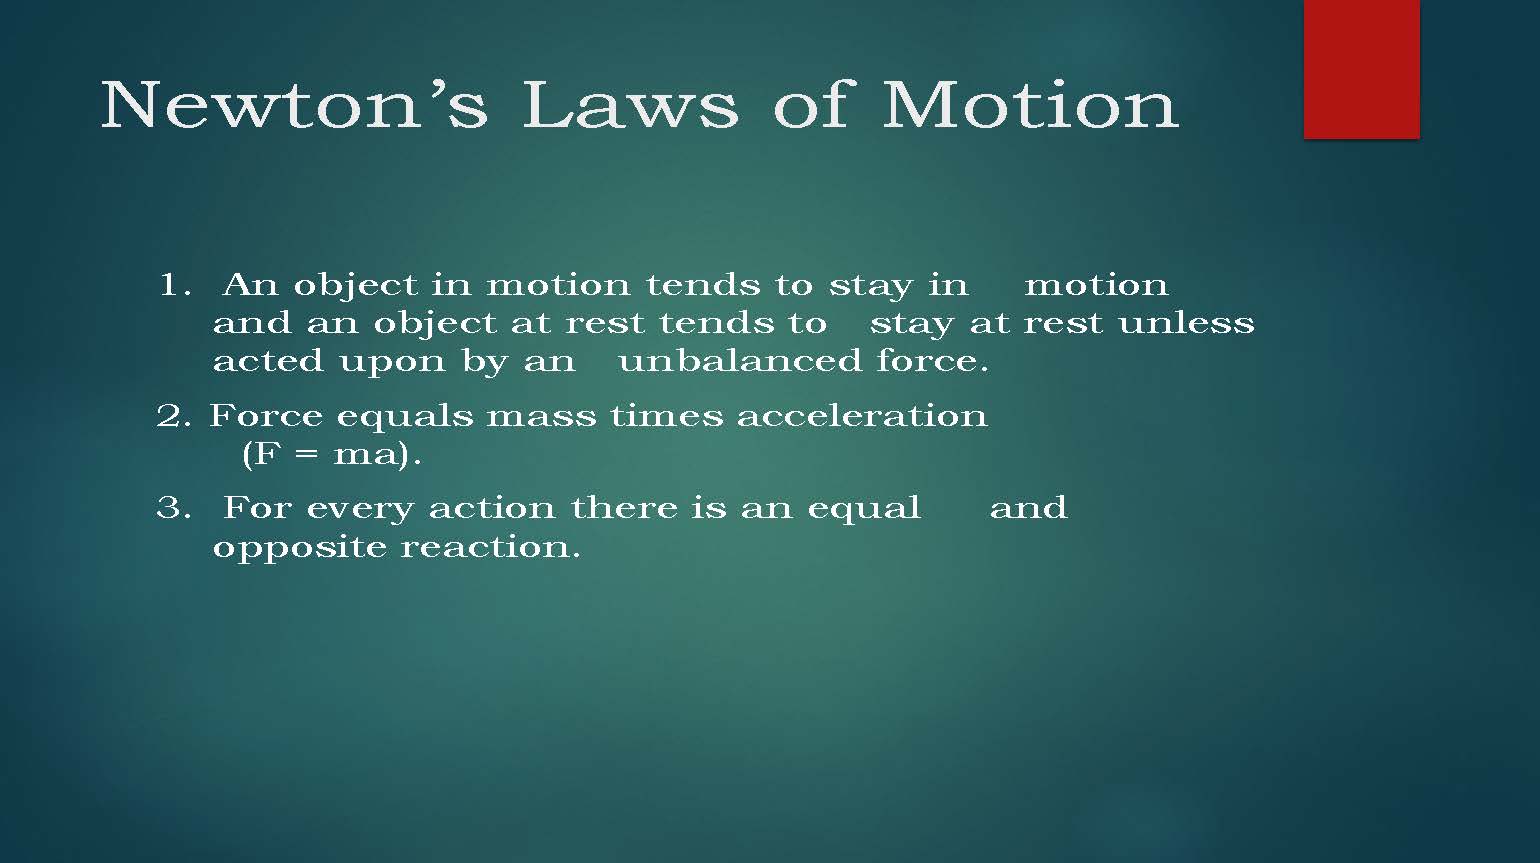 Laws of physics